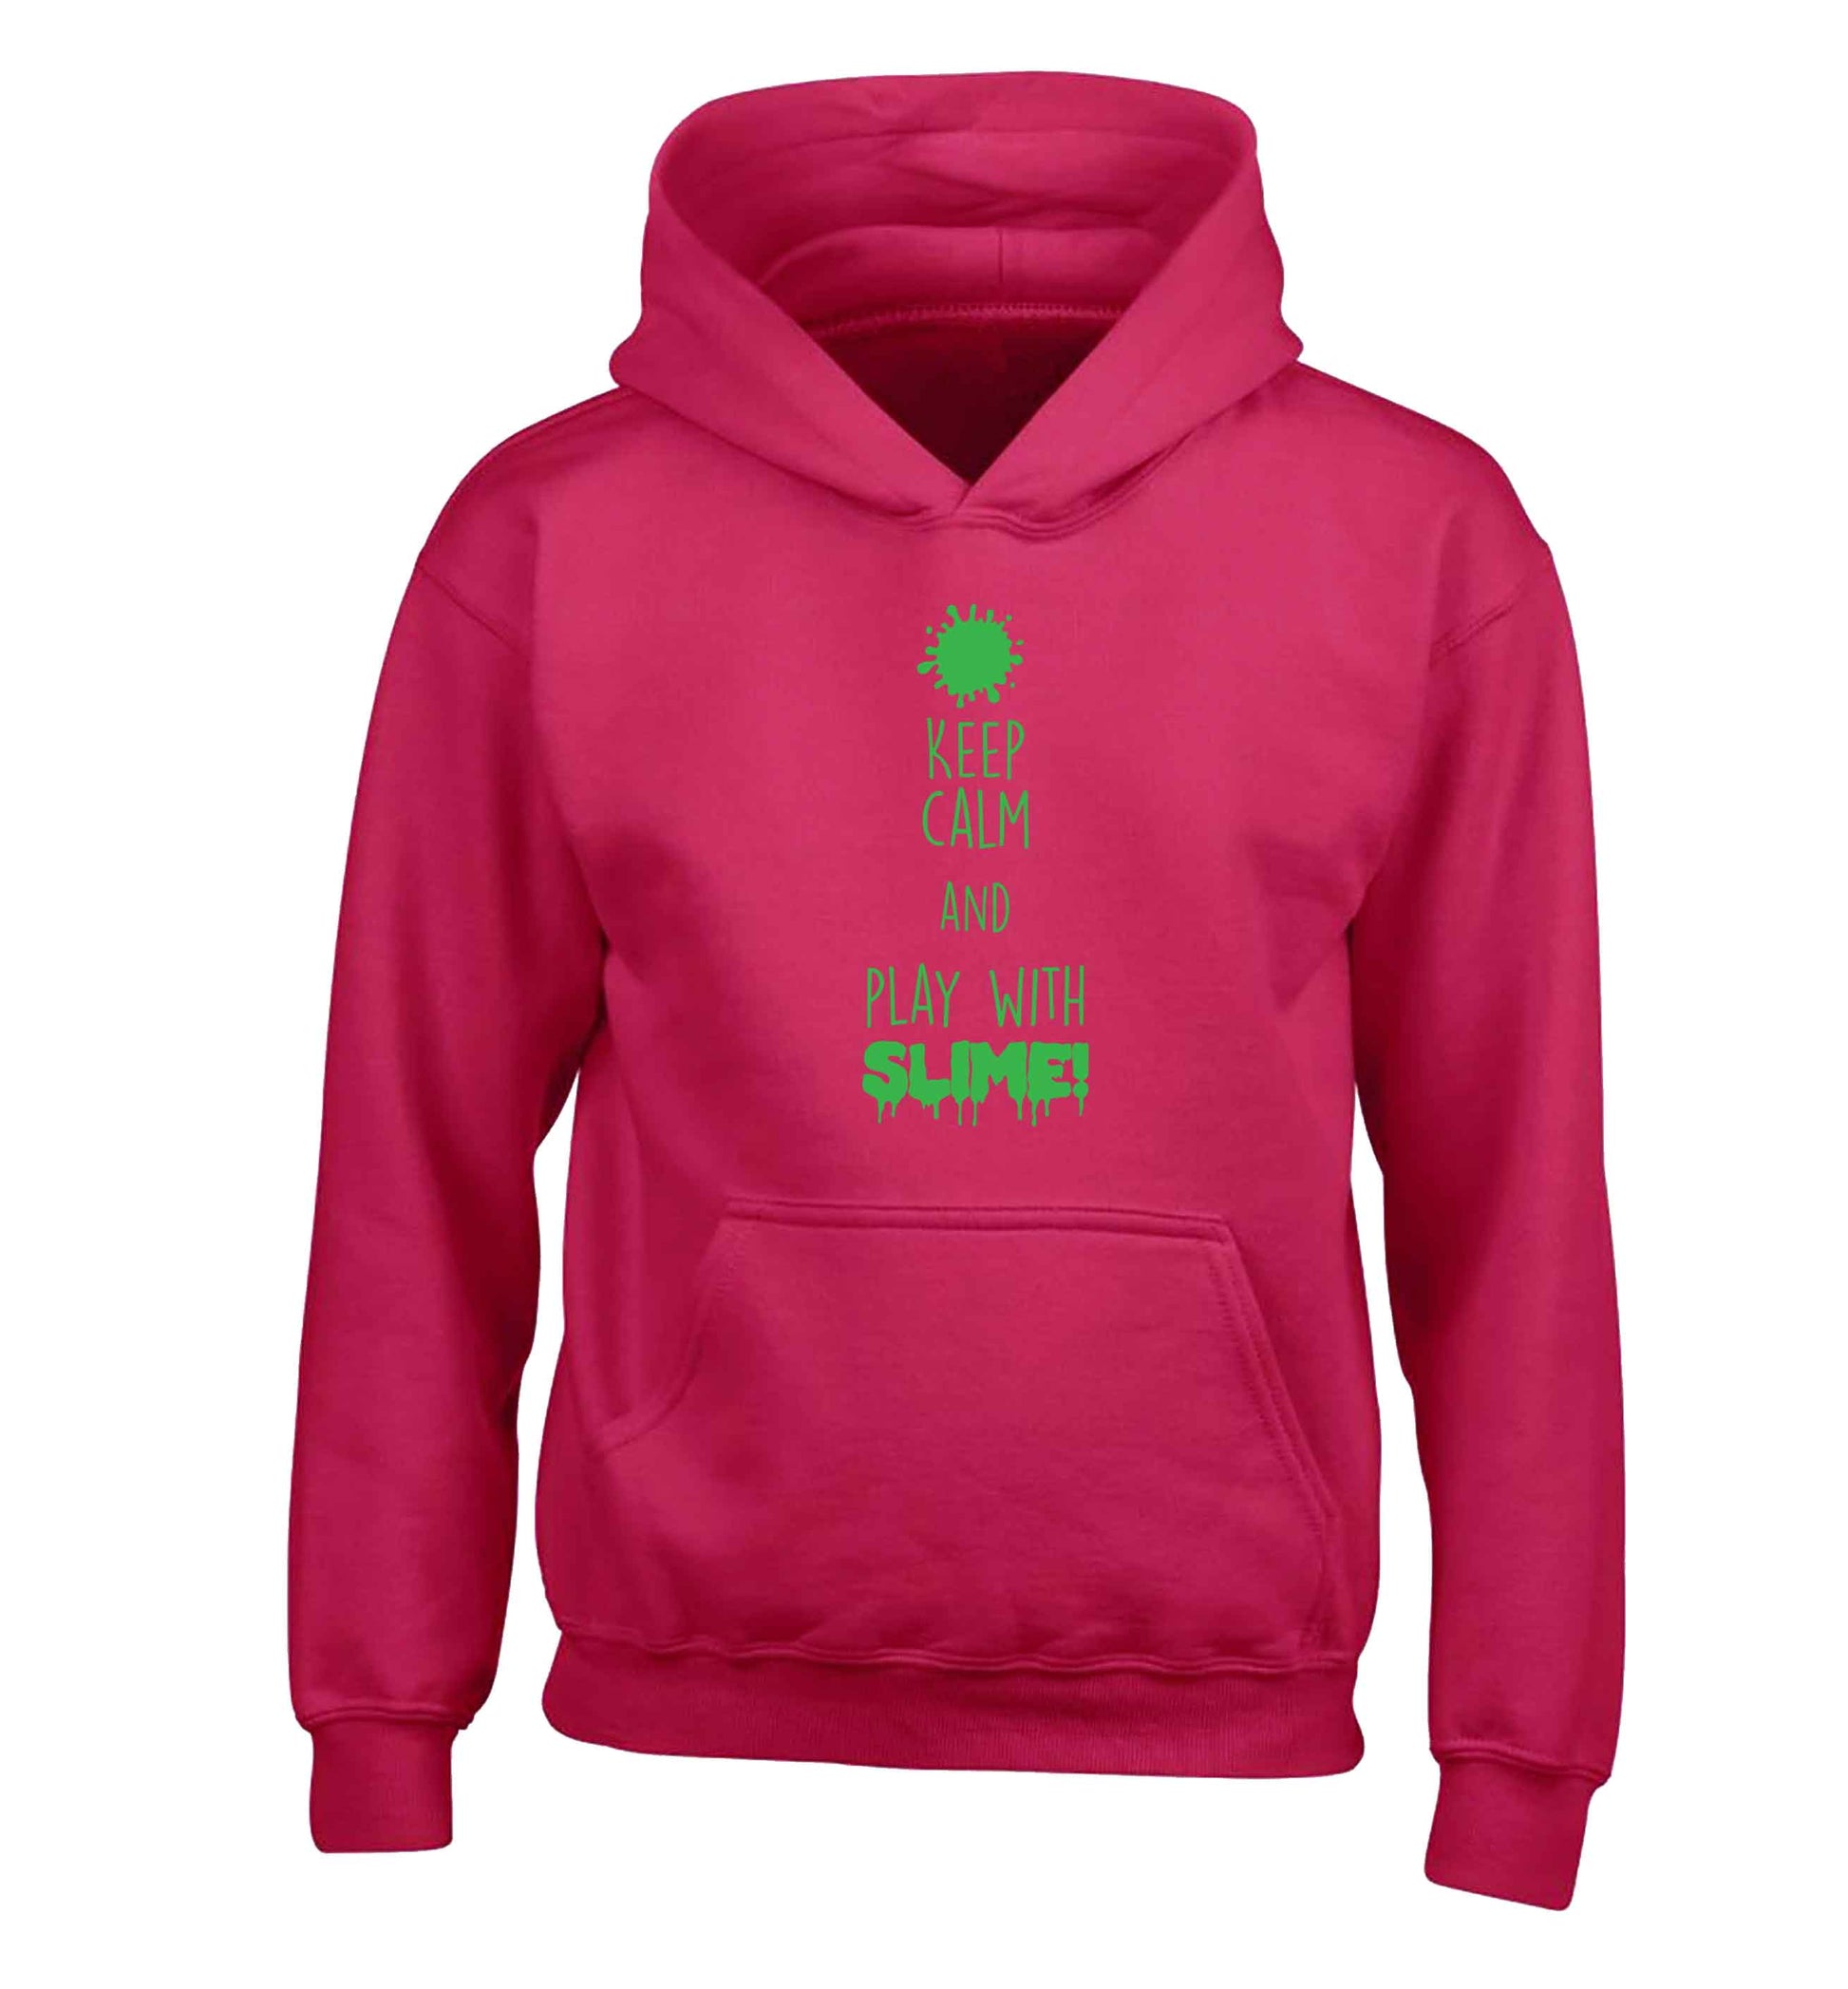 Neon green keep calm and play with slime!children's pink hoodie 12-13 Years